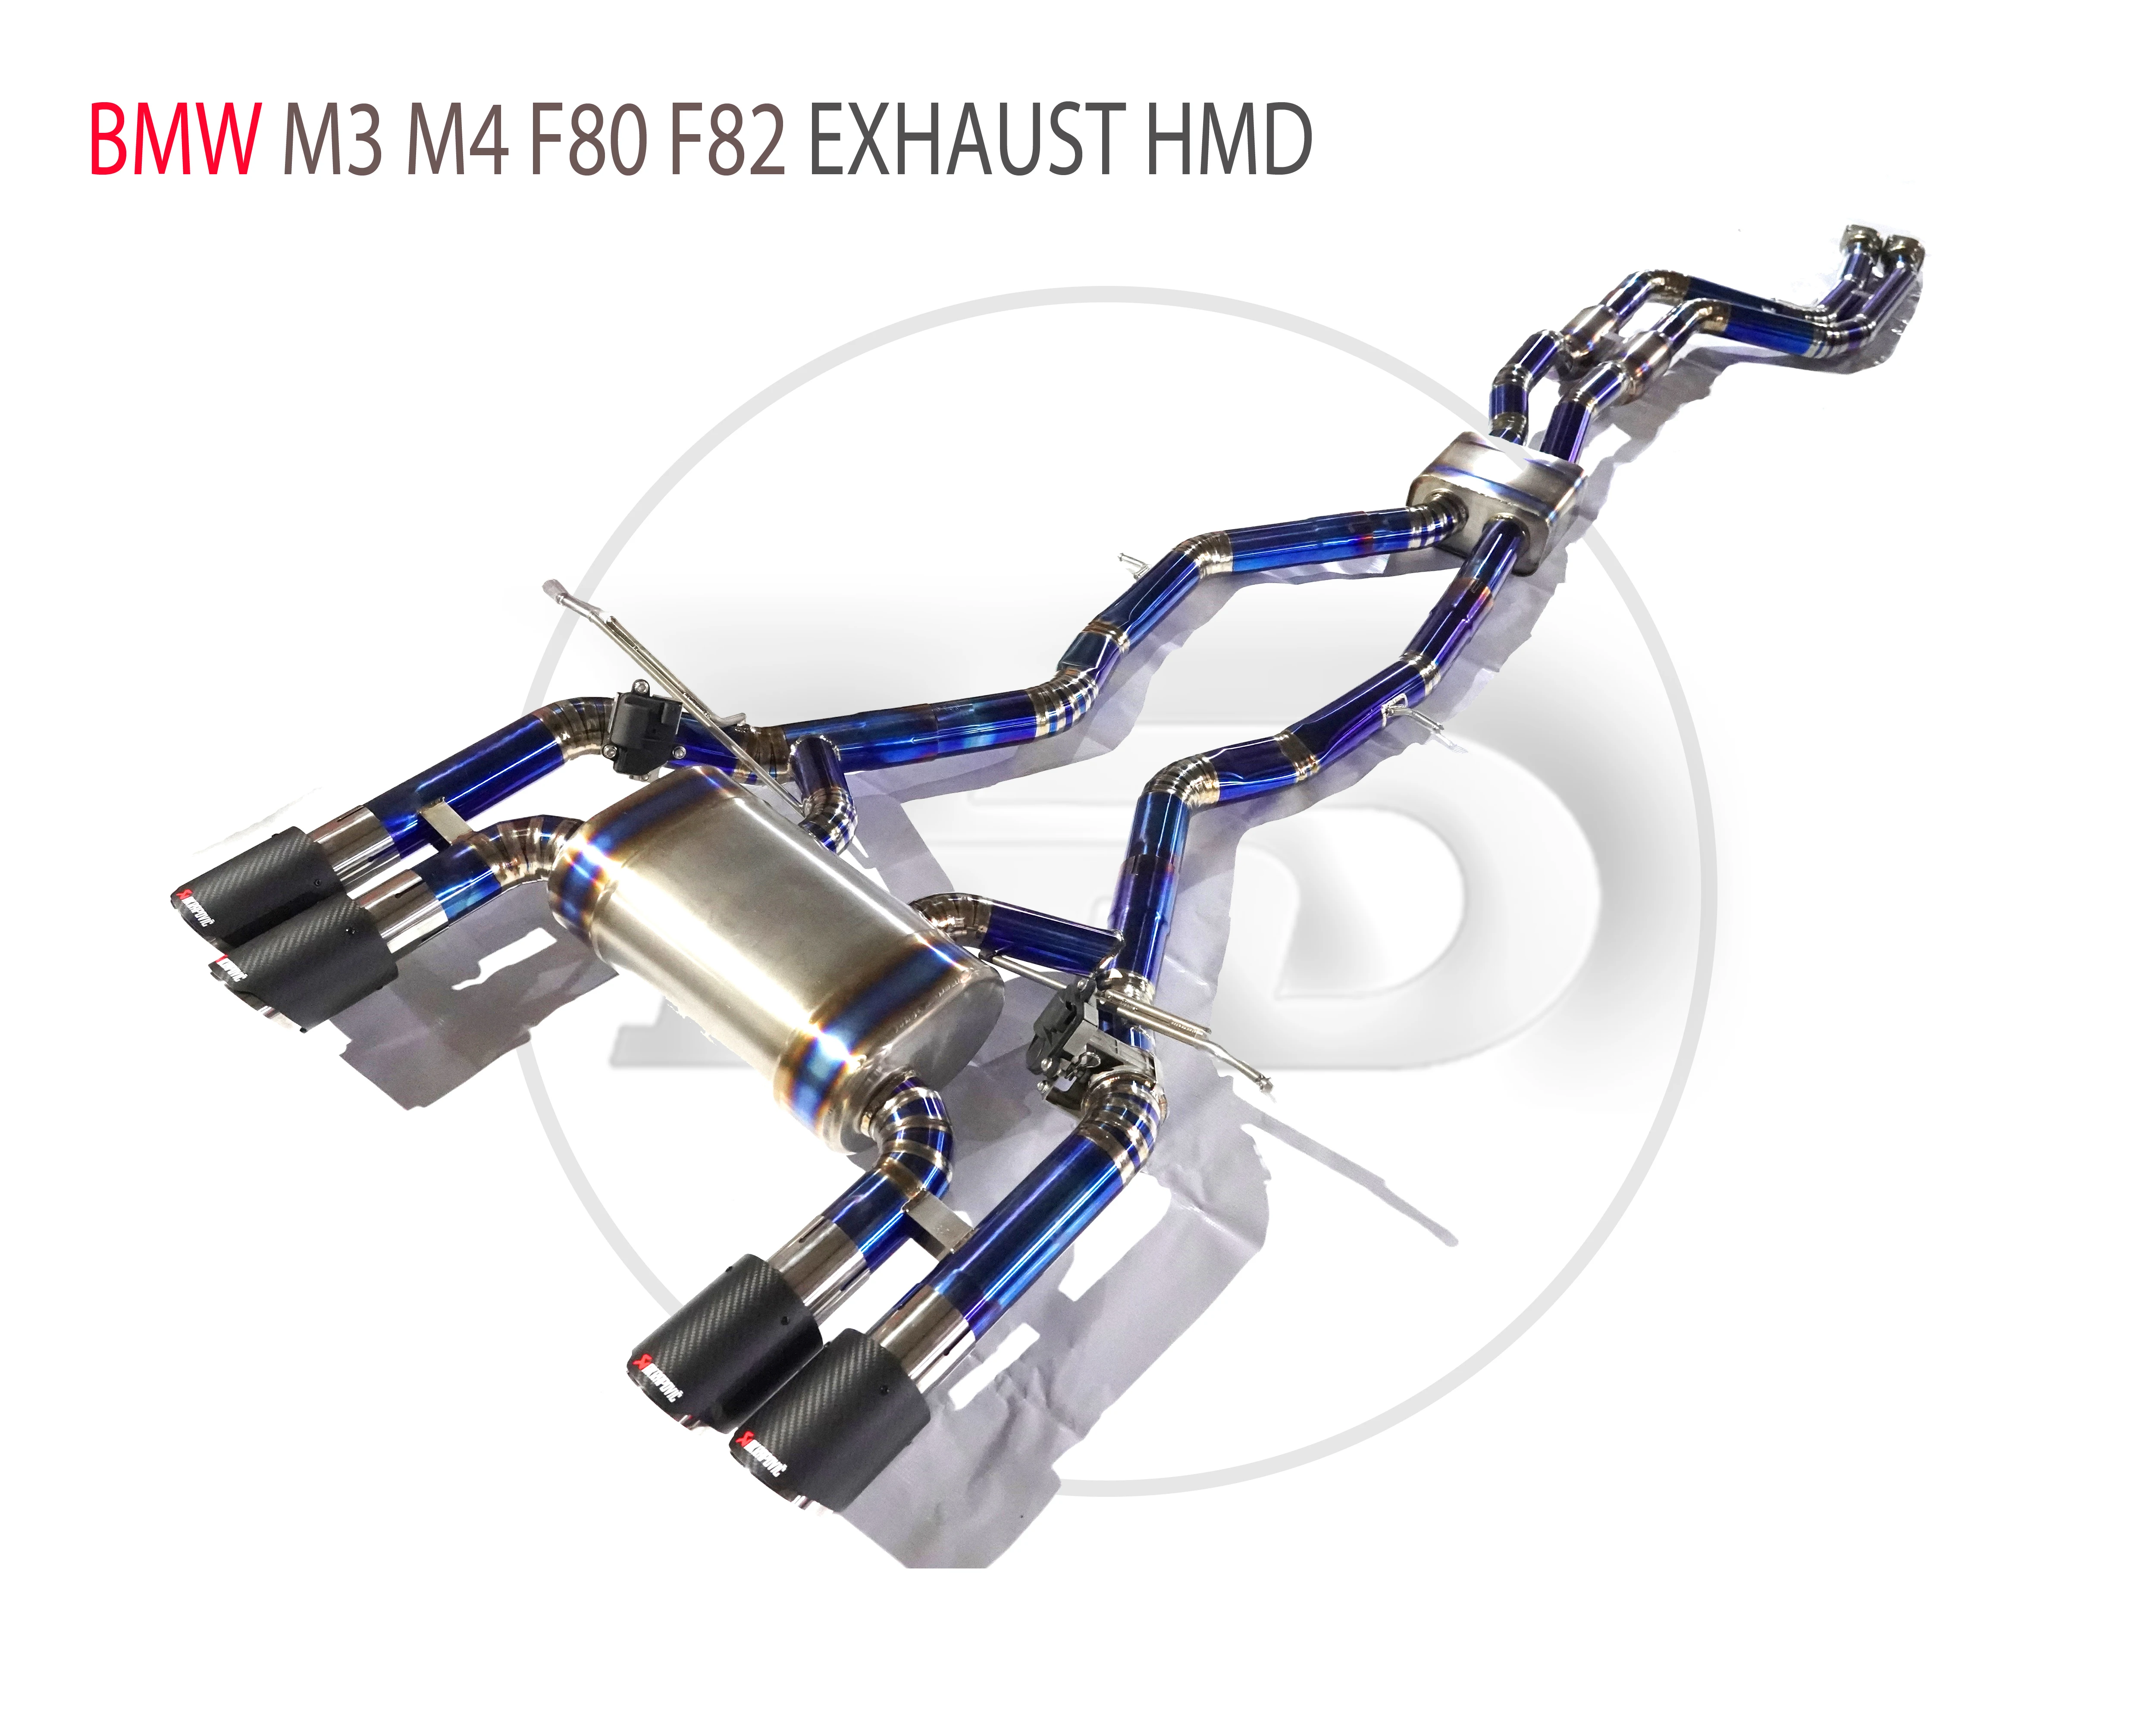 Titanium Alloy Exhaust Manifold Downpipe Is Suitable For BMW M3 M4 F80 F82 Modification With Catalytic Converter Header